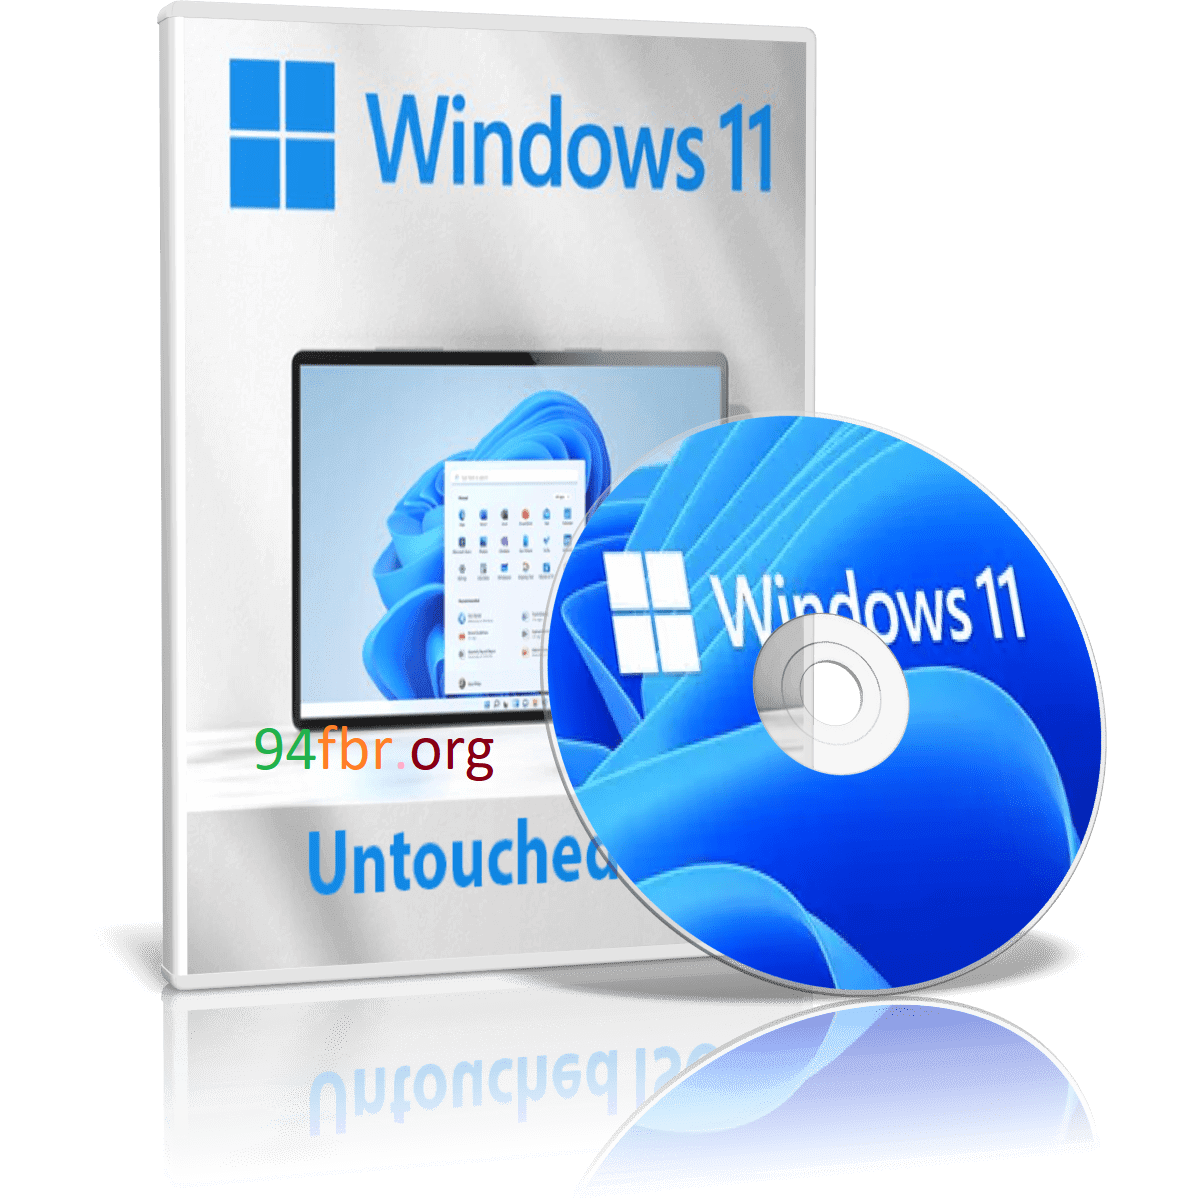 Windows 11 ISO Download (x64) All Editions Activated from 94fbr.org